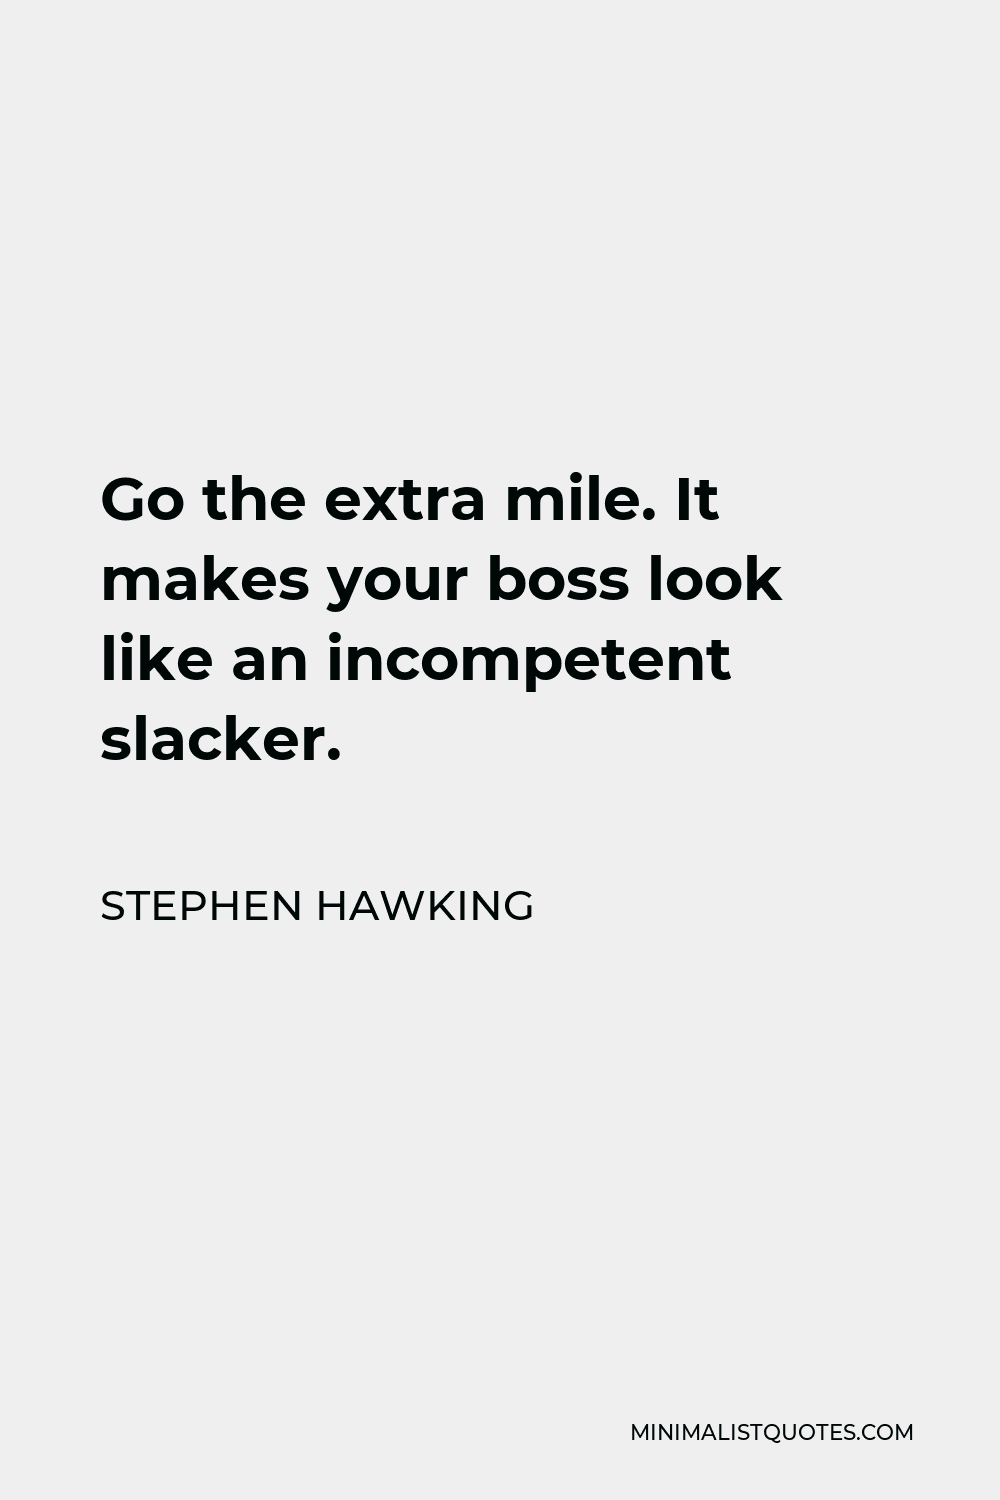 Stephen Hawking Quote - Go the extra mile. It makes your boss look like an incompetent slacker.